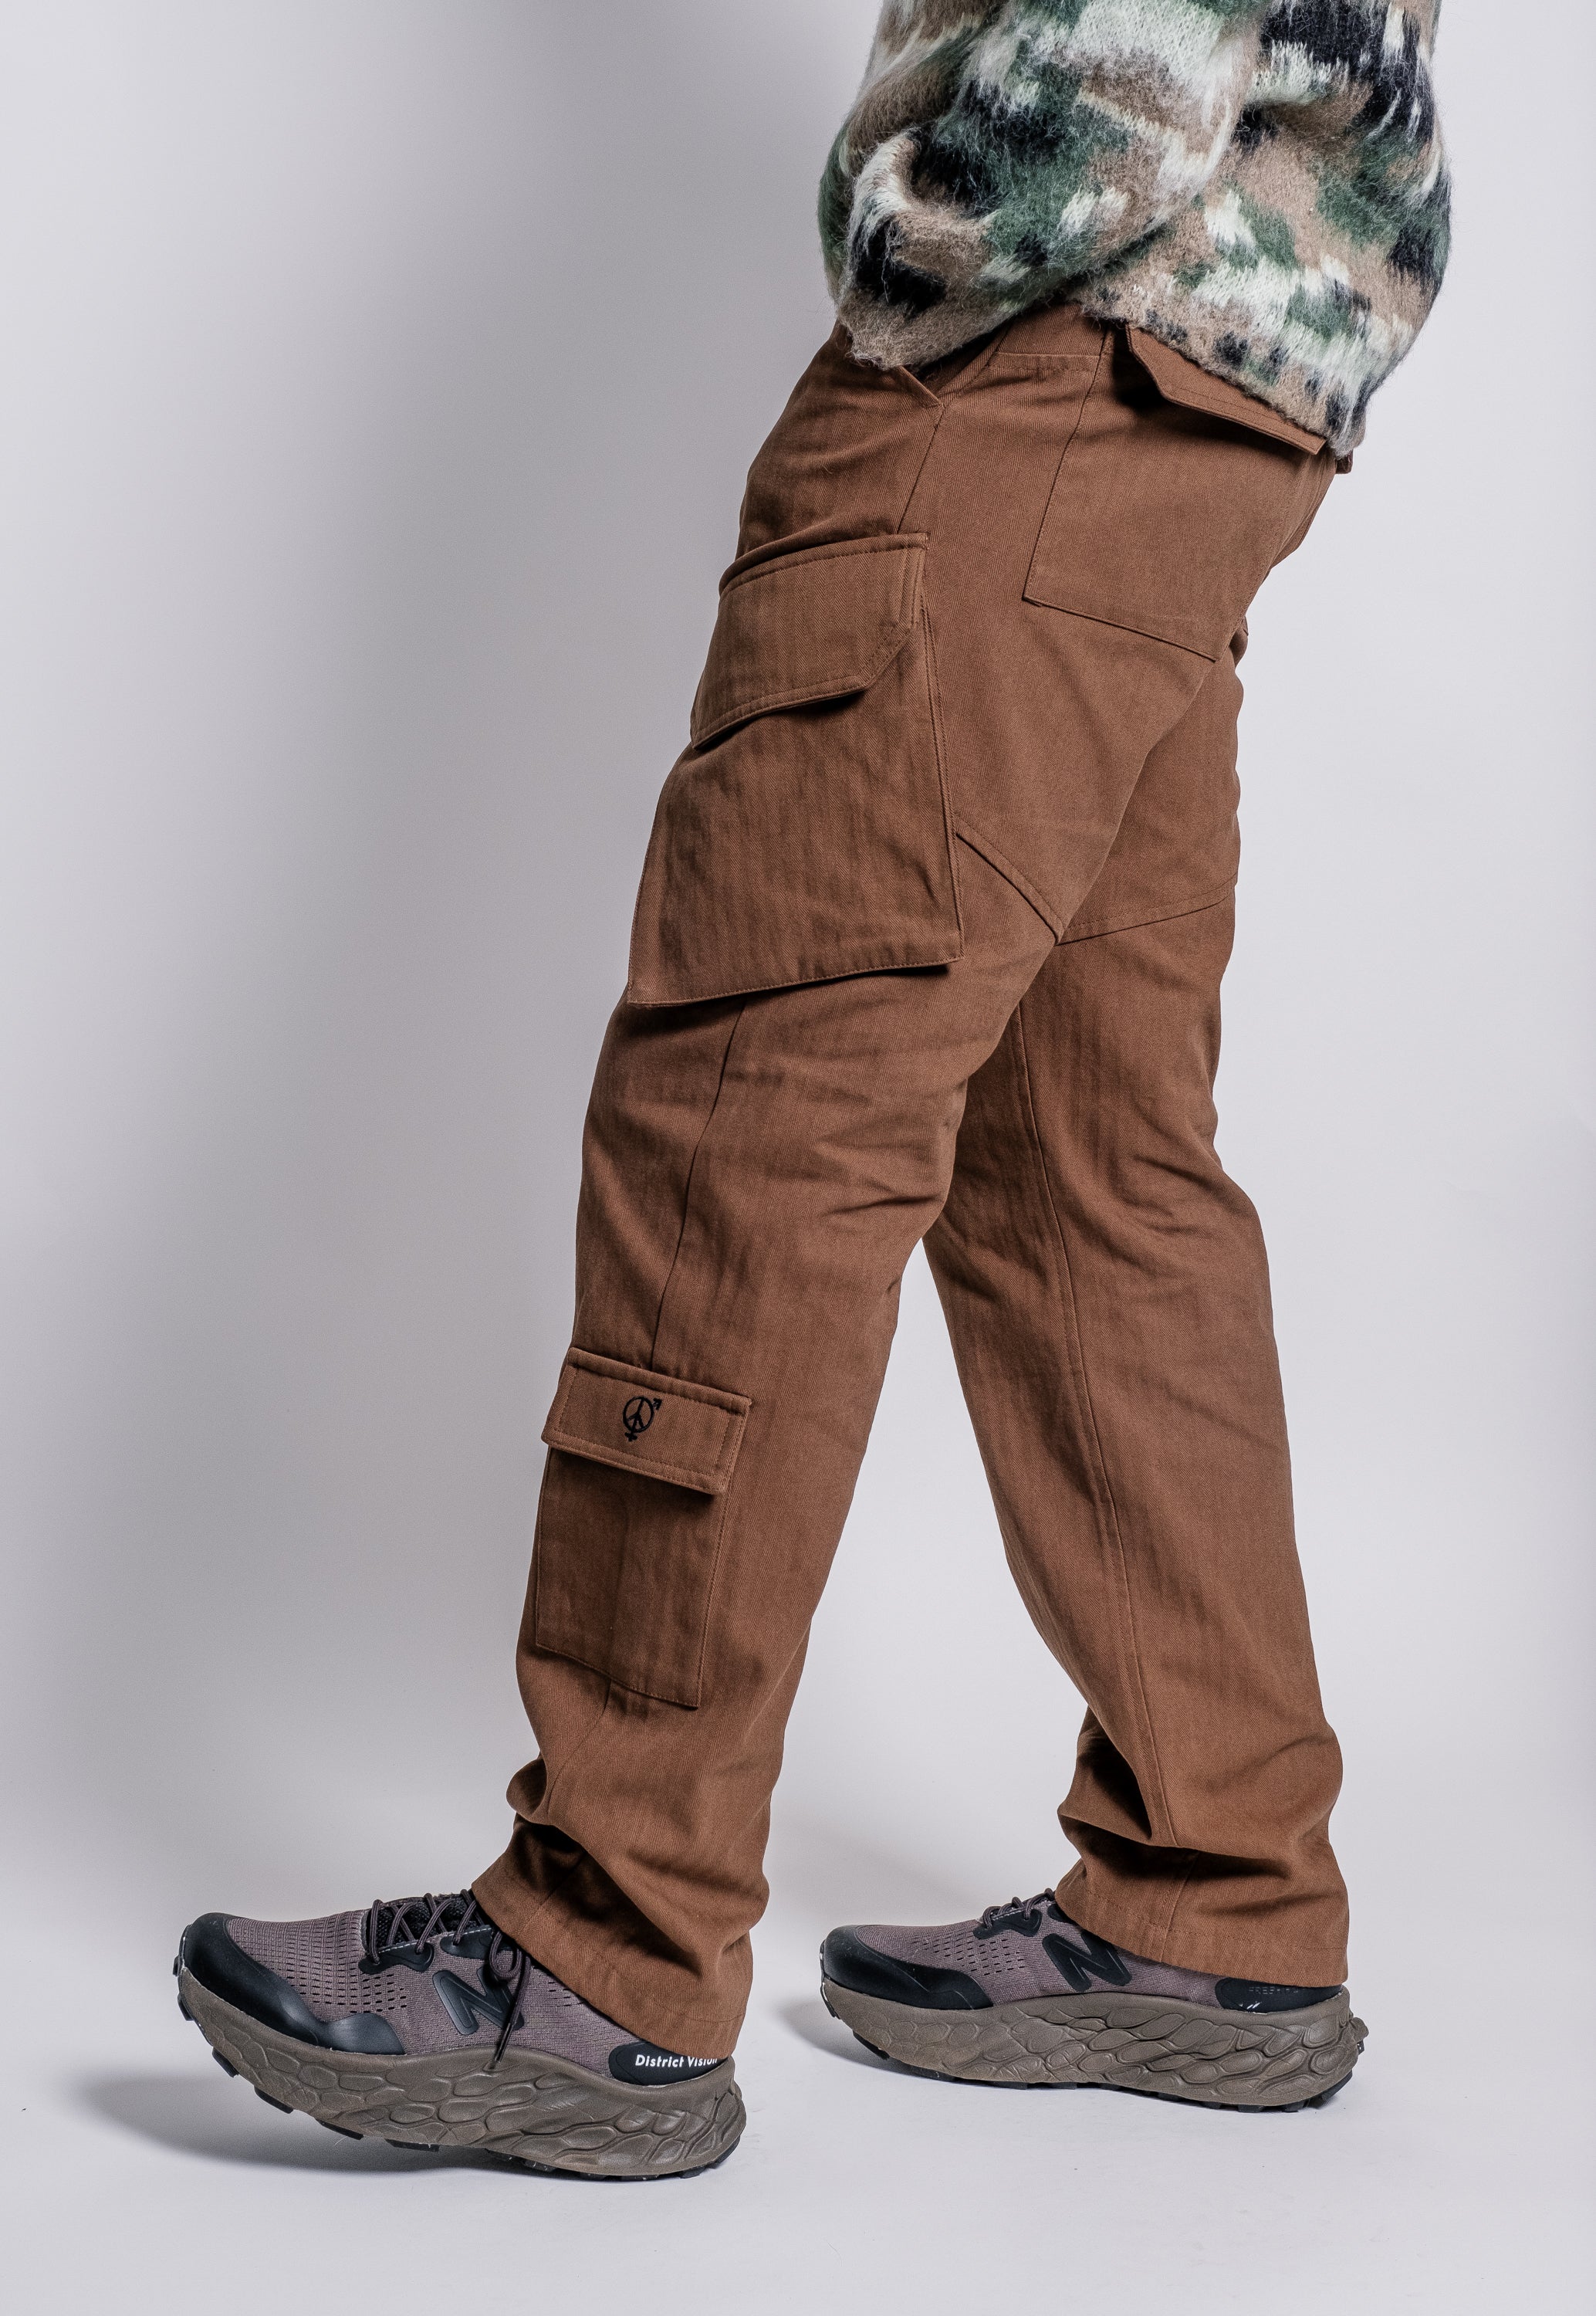 Relaxed Fit Cargo Pants - Brown - Men | H&M US